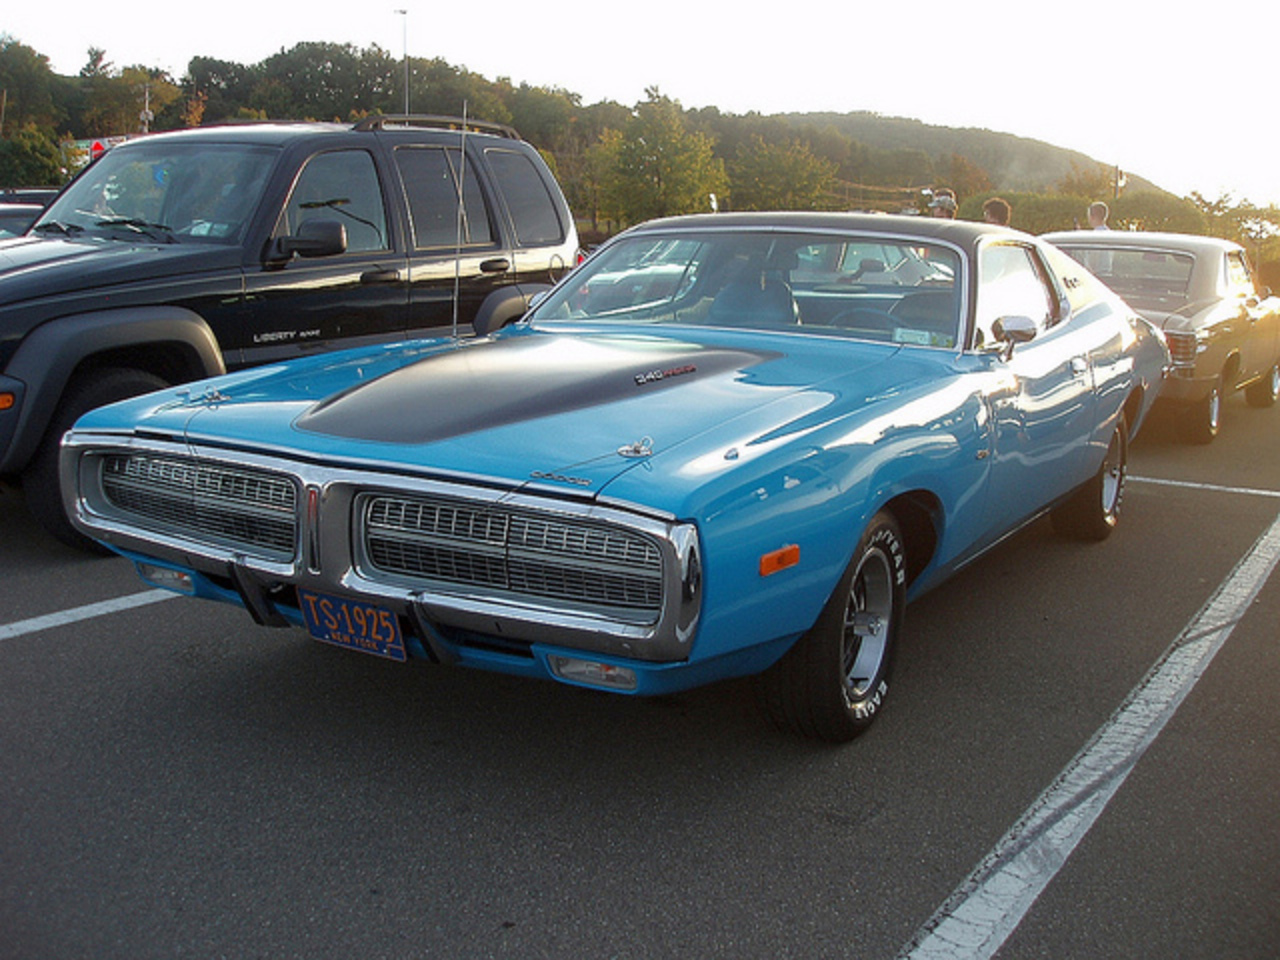 Dodge Charger 340 | Flickr - Photo Sharing!